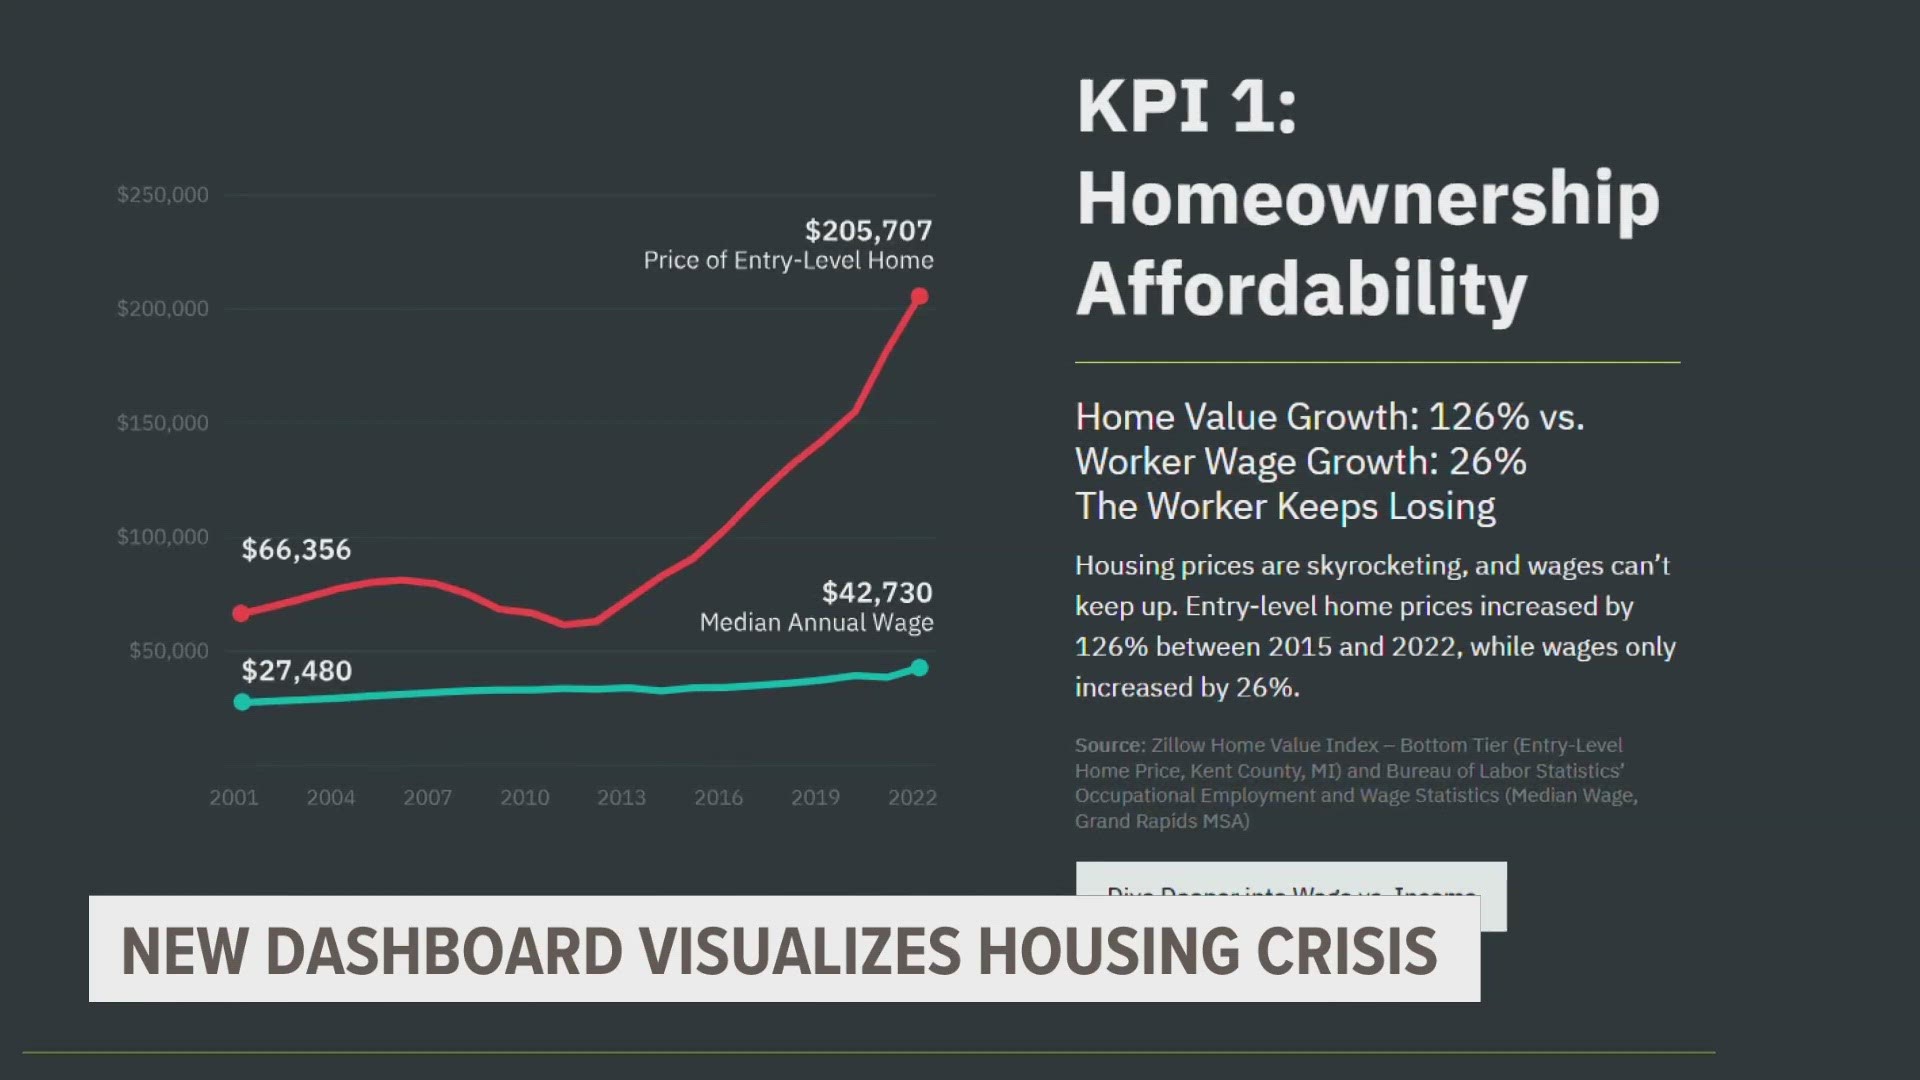 You can find more data on Housing Kent's website: https://housingkent.org/kpi-overview/